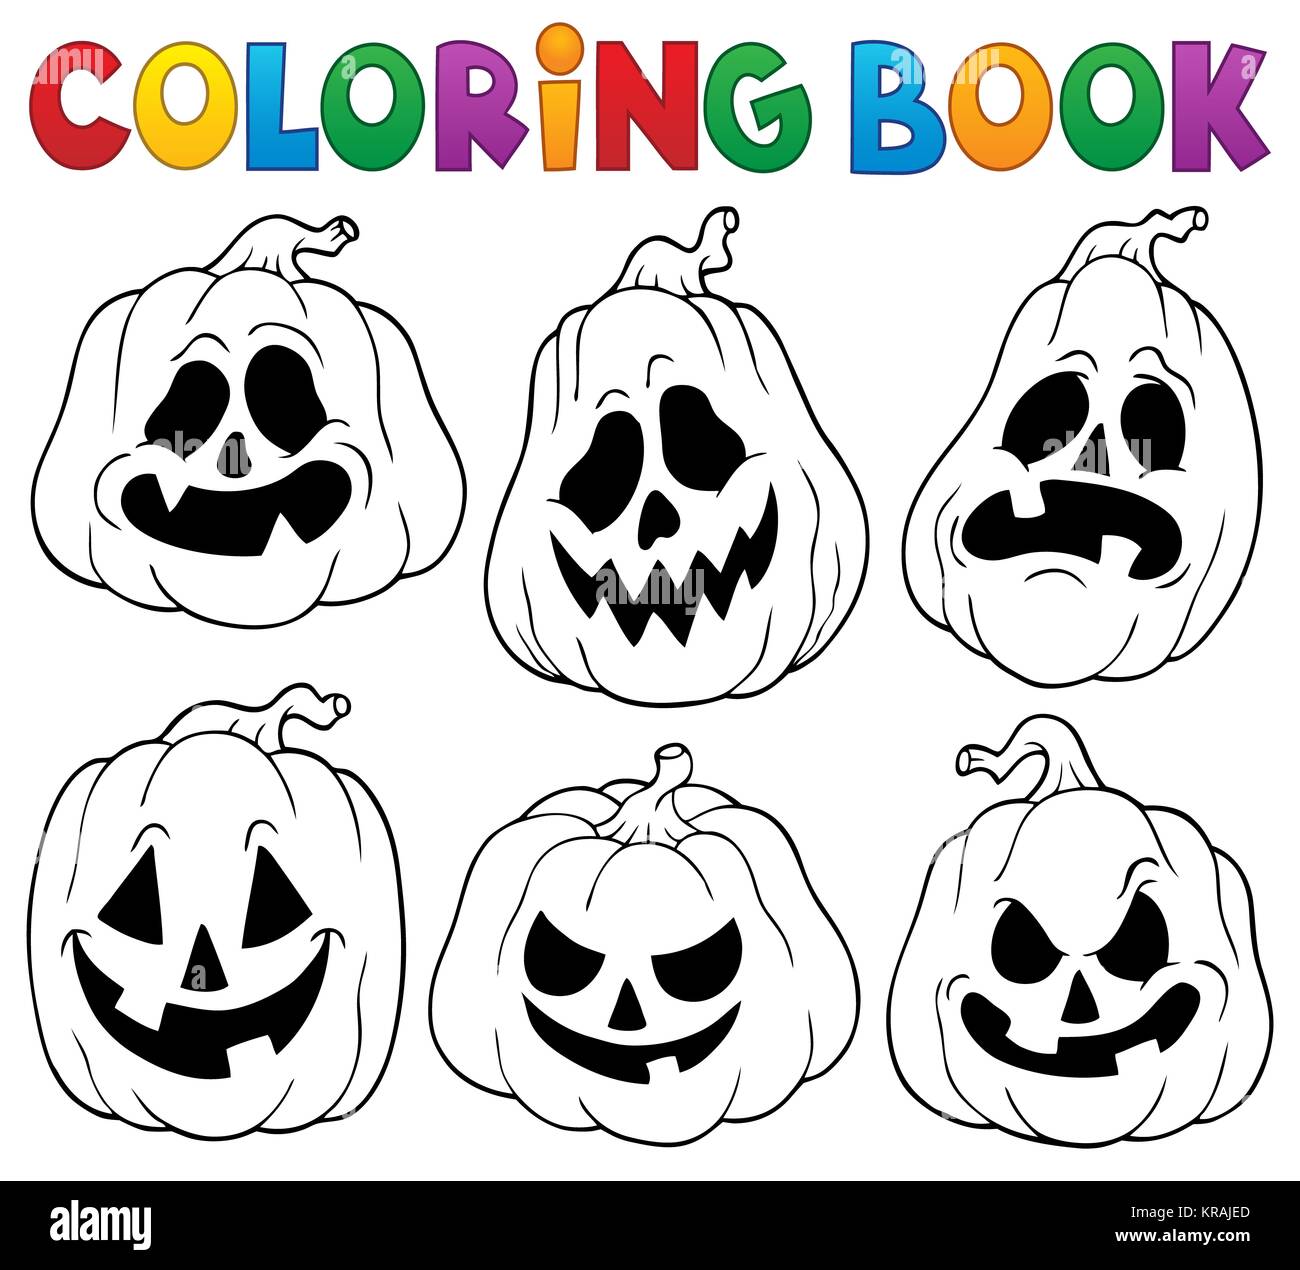 Coloring book with Halloween pumpkins 1 Stock Photo